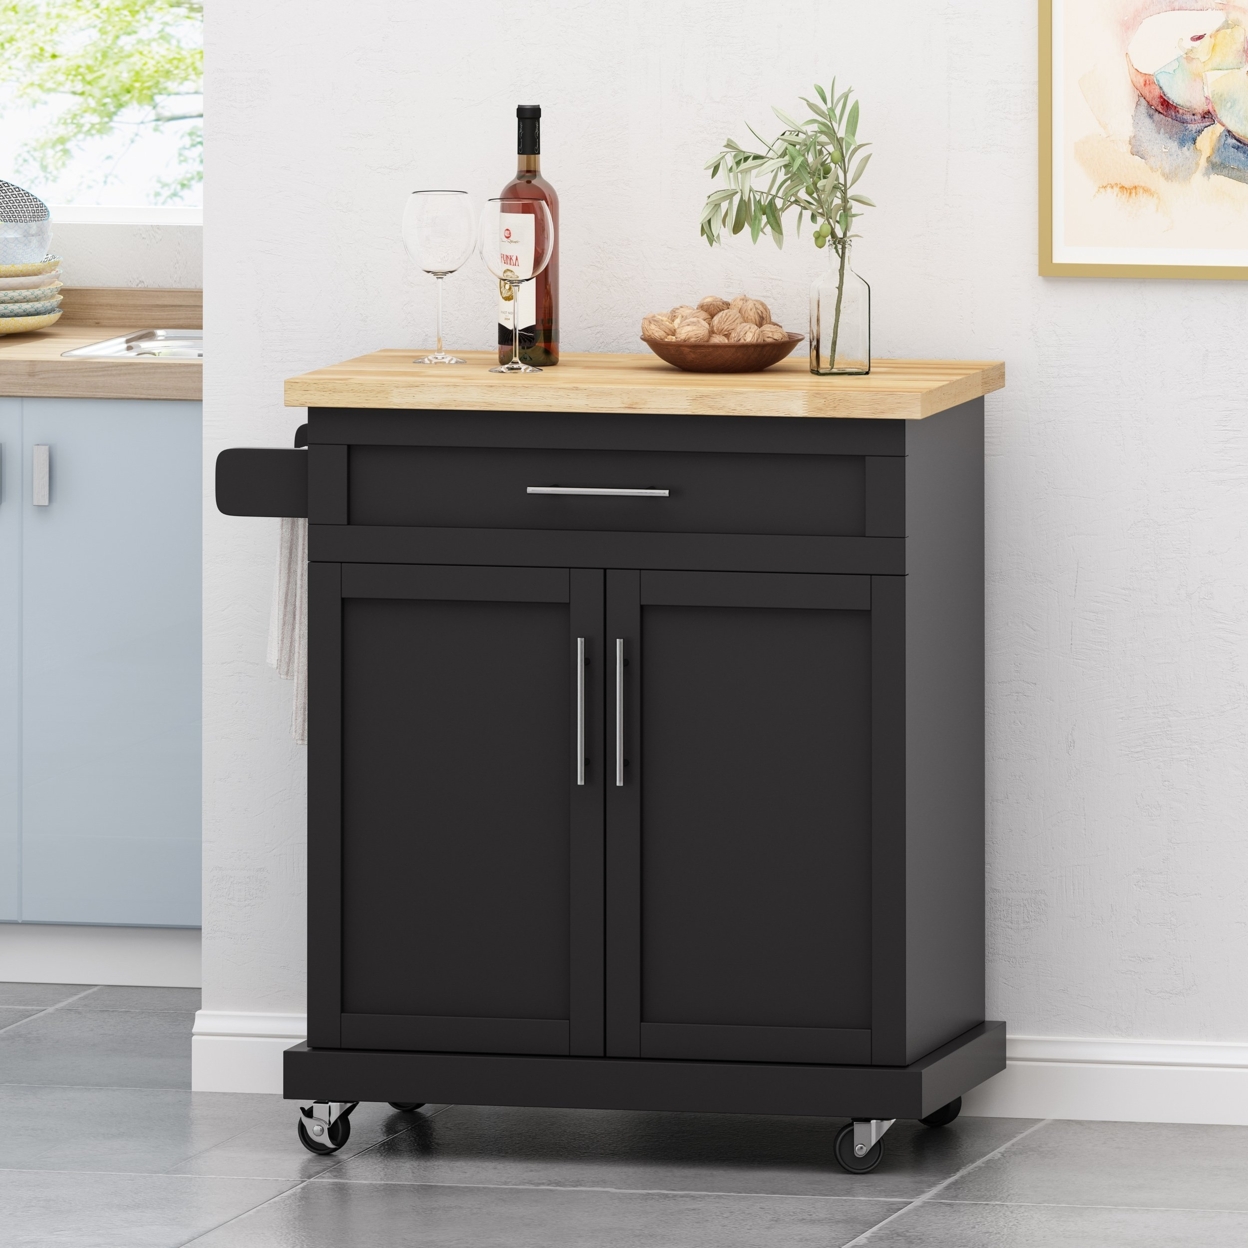 Negley Contemporary Kitchen Cart With Wheels - Black/natural